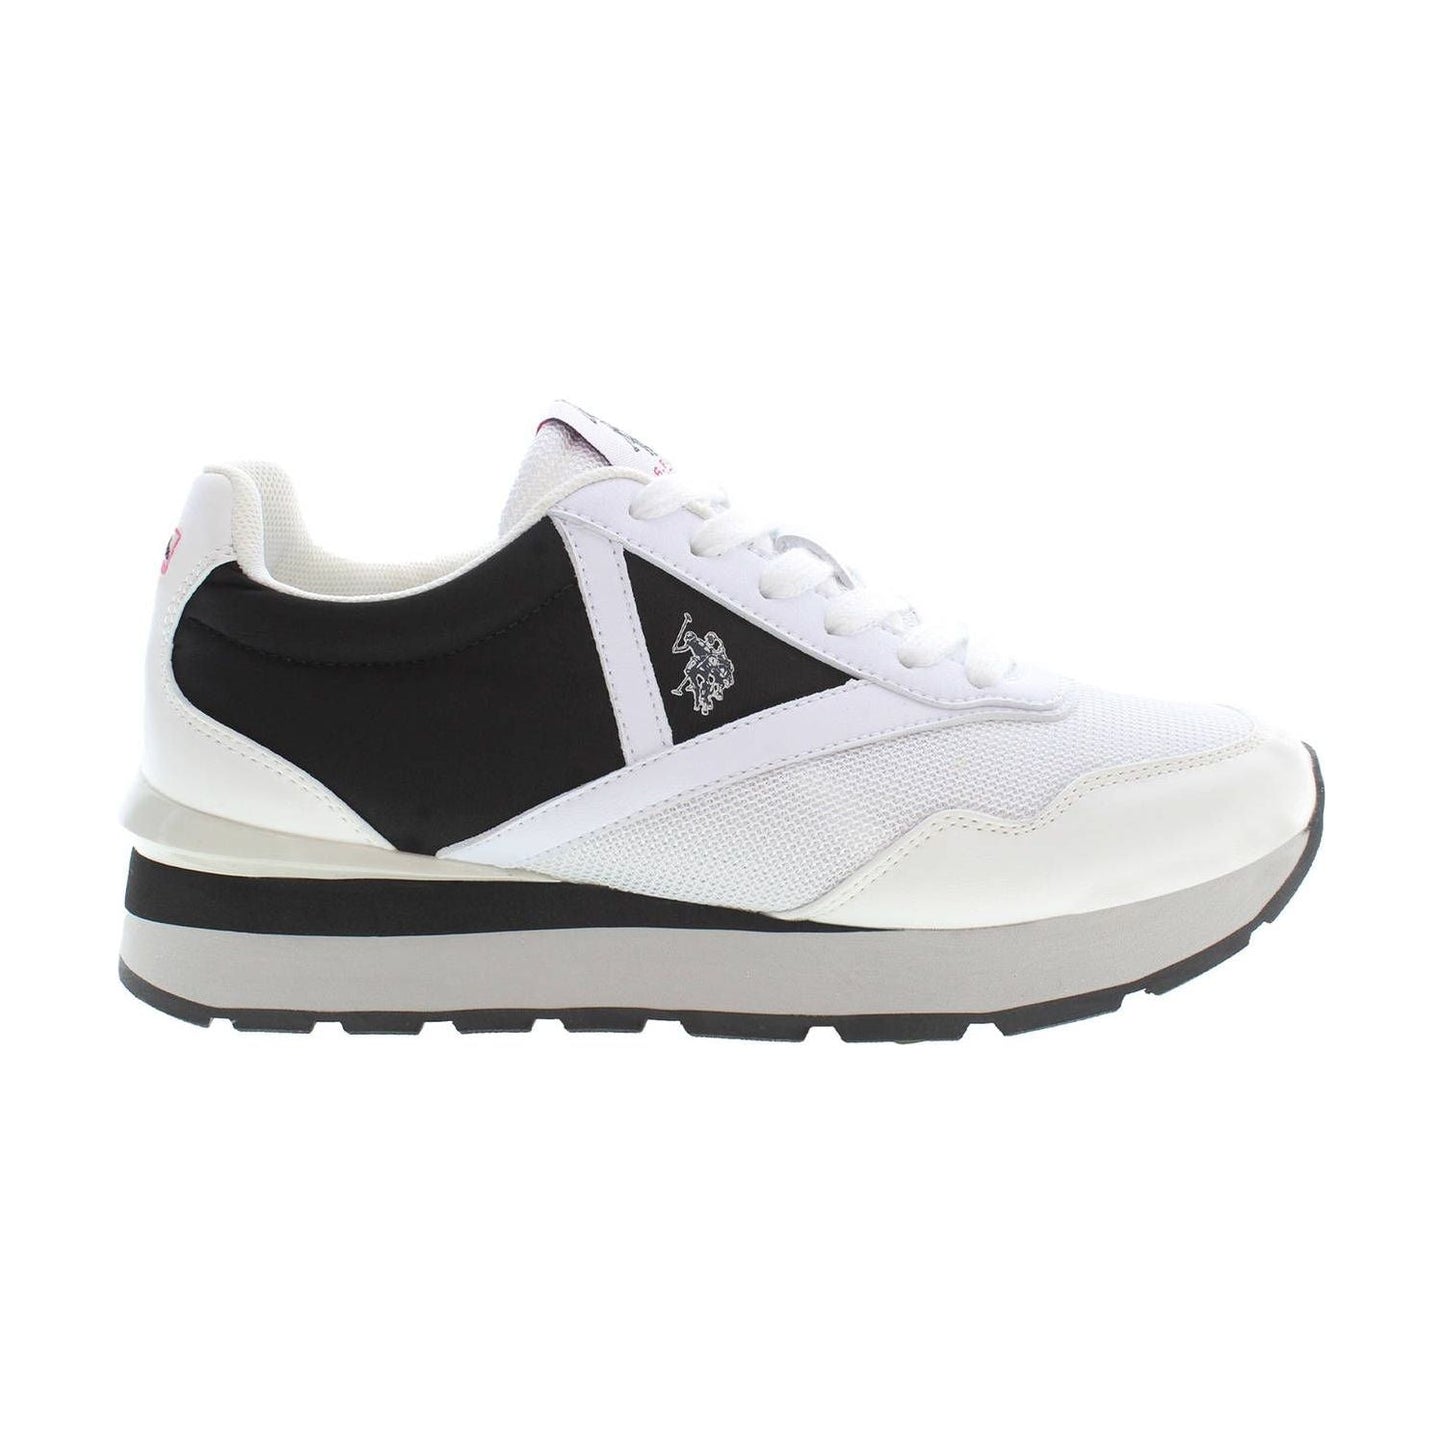 U.S. POLO ASSN. Elegant White Lace-Up Sneakers with Logo Accent elegant-white-lace-up-sneakers-with-logo-accent